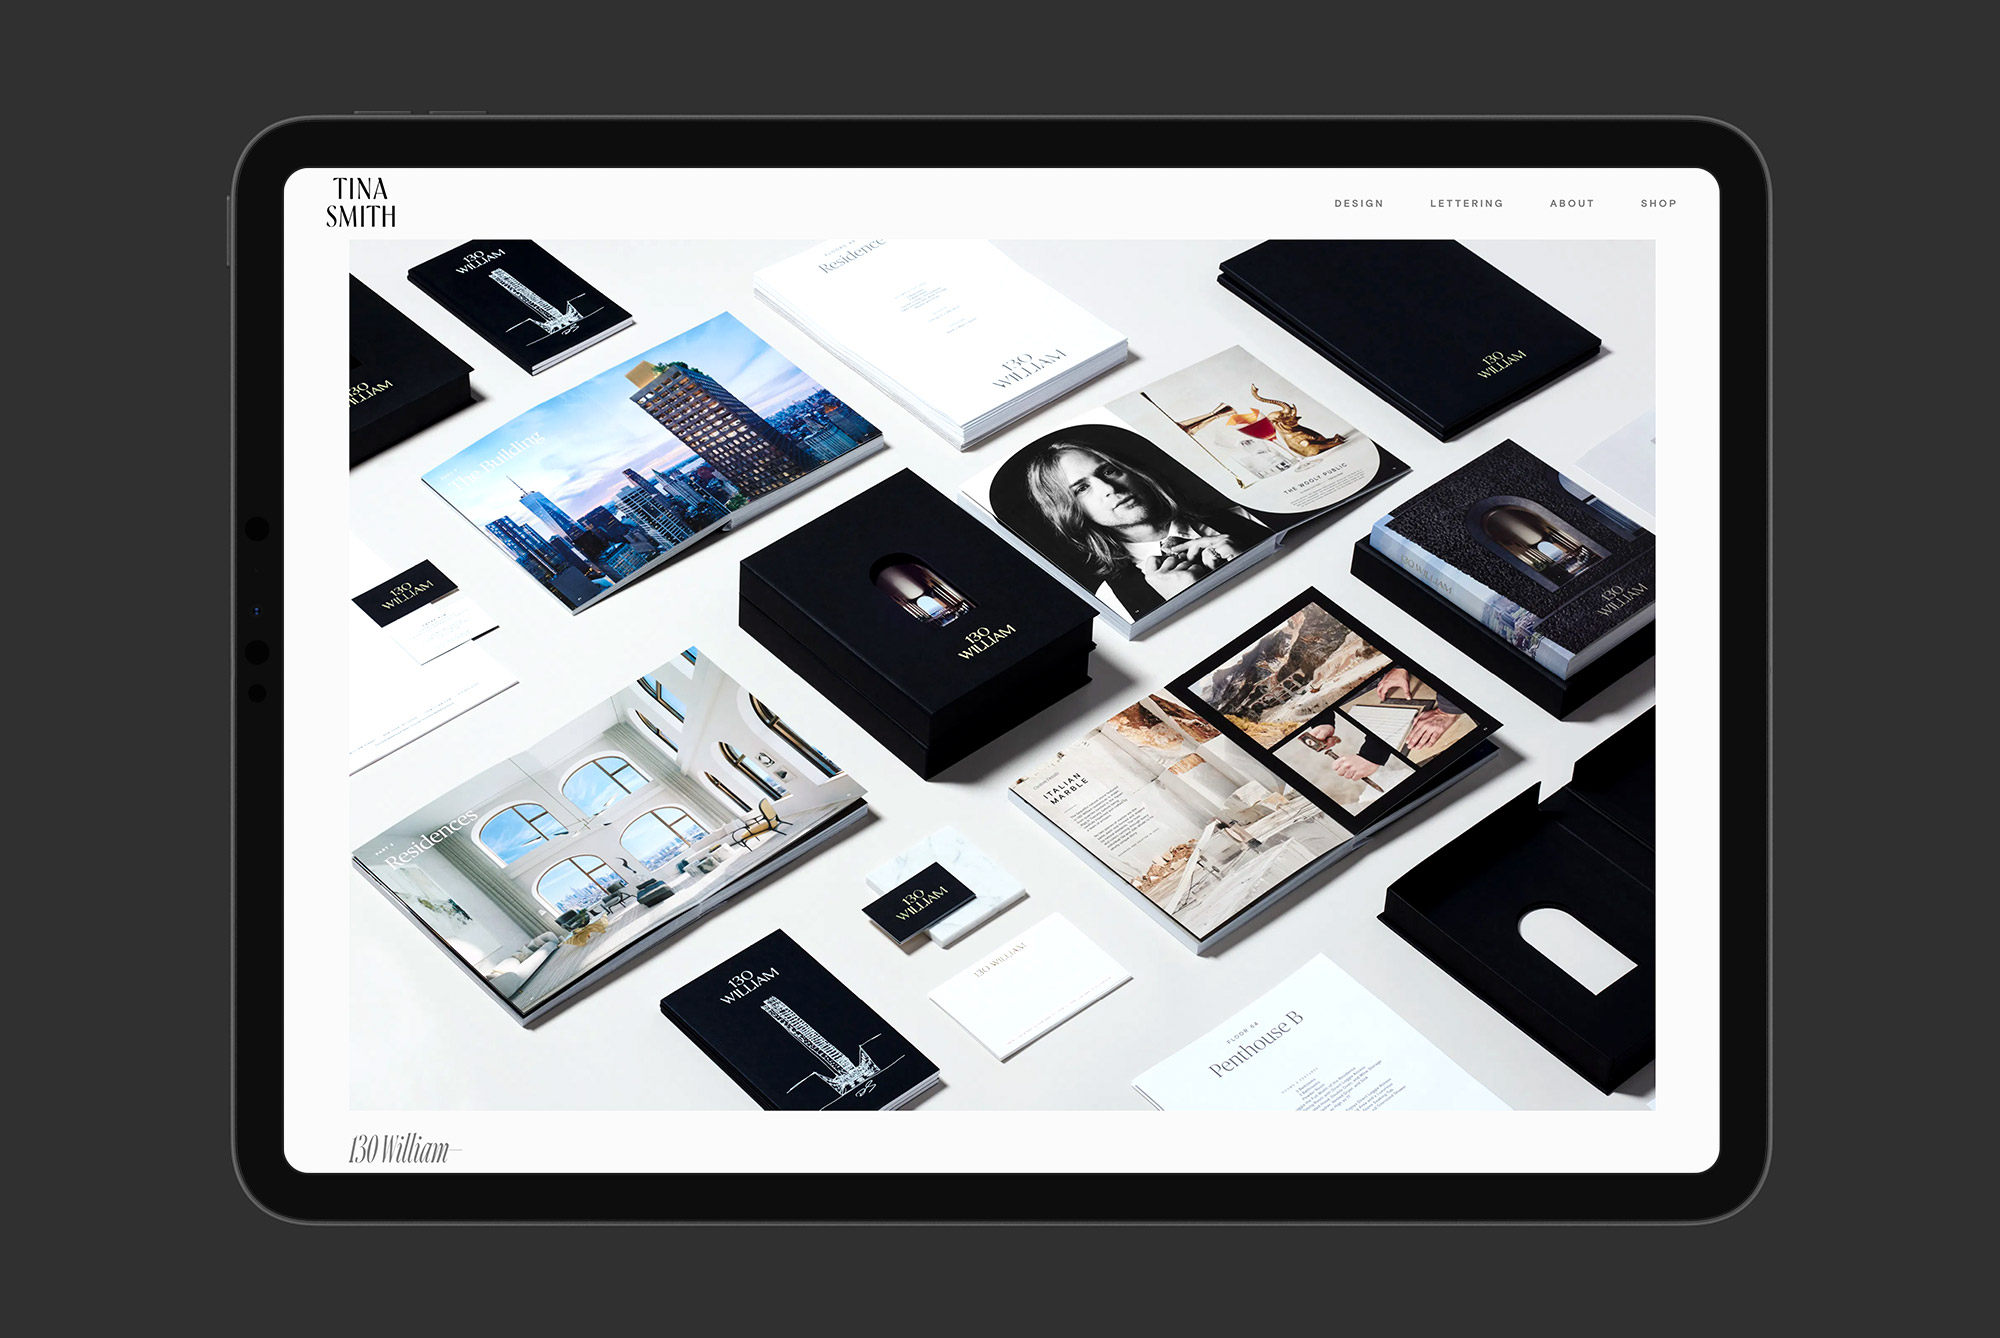 Portfolio website design mockup displayed on a tablet showing a collection of branding materials, stationery, and creative layouts for designers.